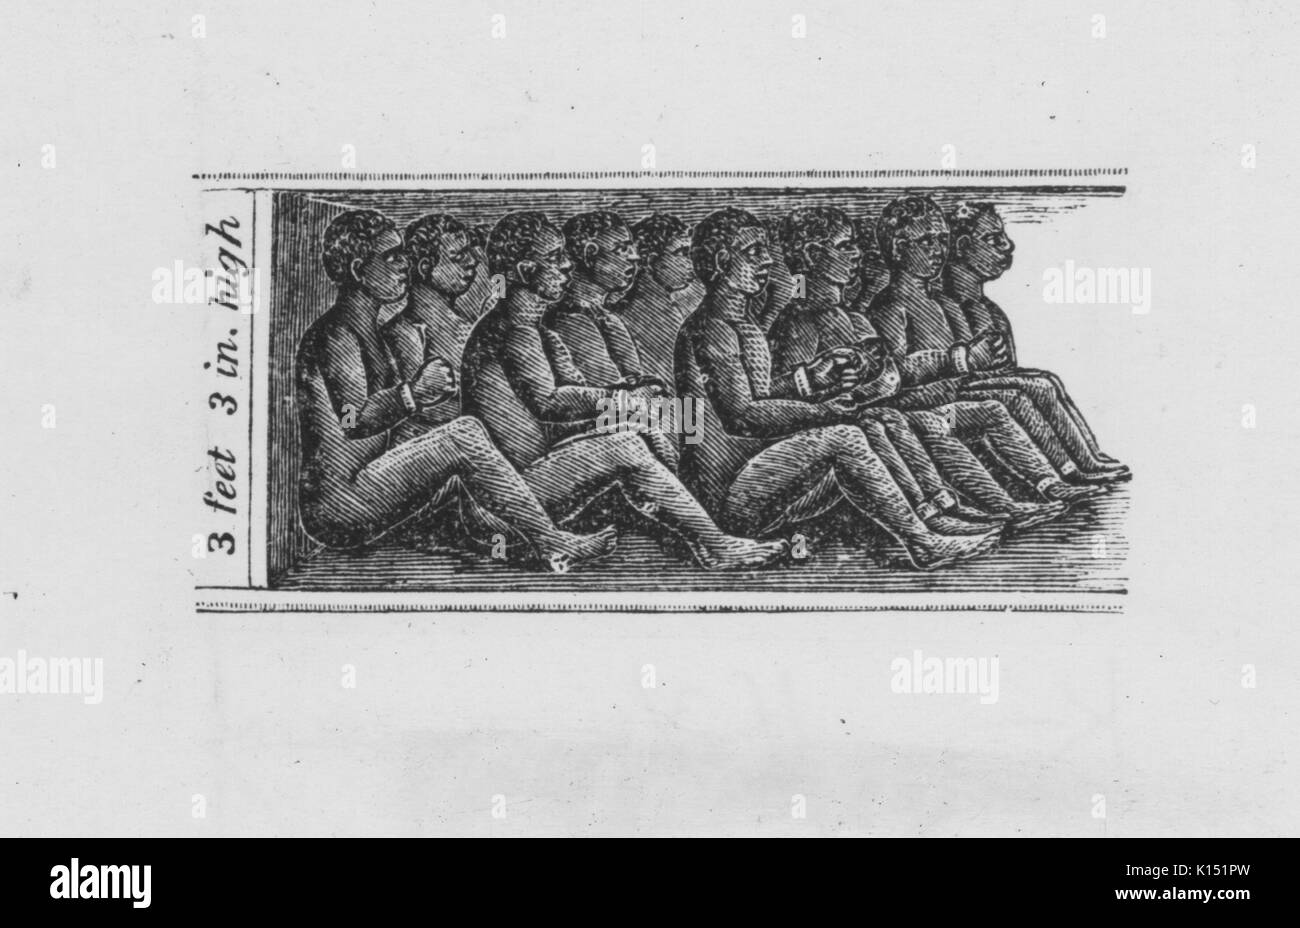 Engraving of chained African slaves in cargo hold of the slave ship Amistad, from Africa to Havana, measuring three feet and three inches high, by John Warner Barber, 1900. From the New York Public Library. Stock Photo